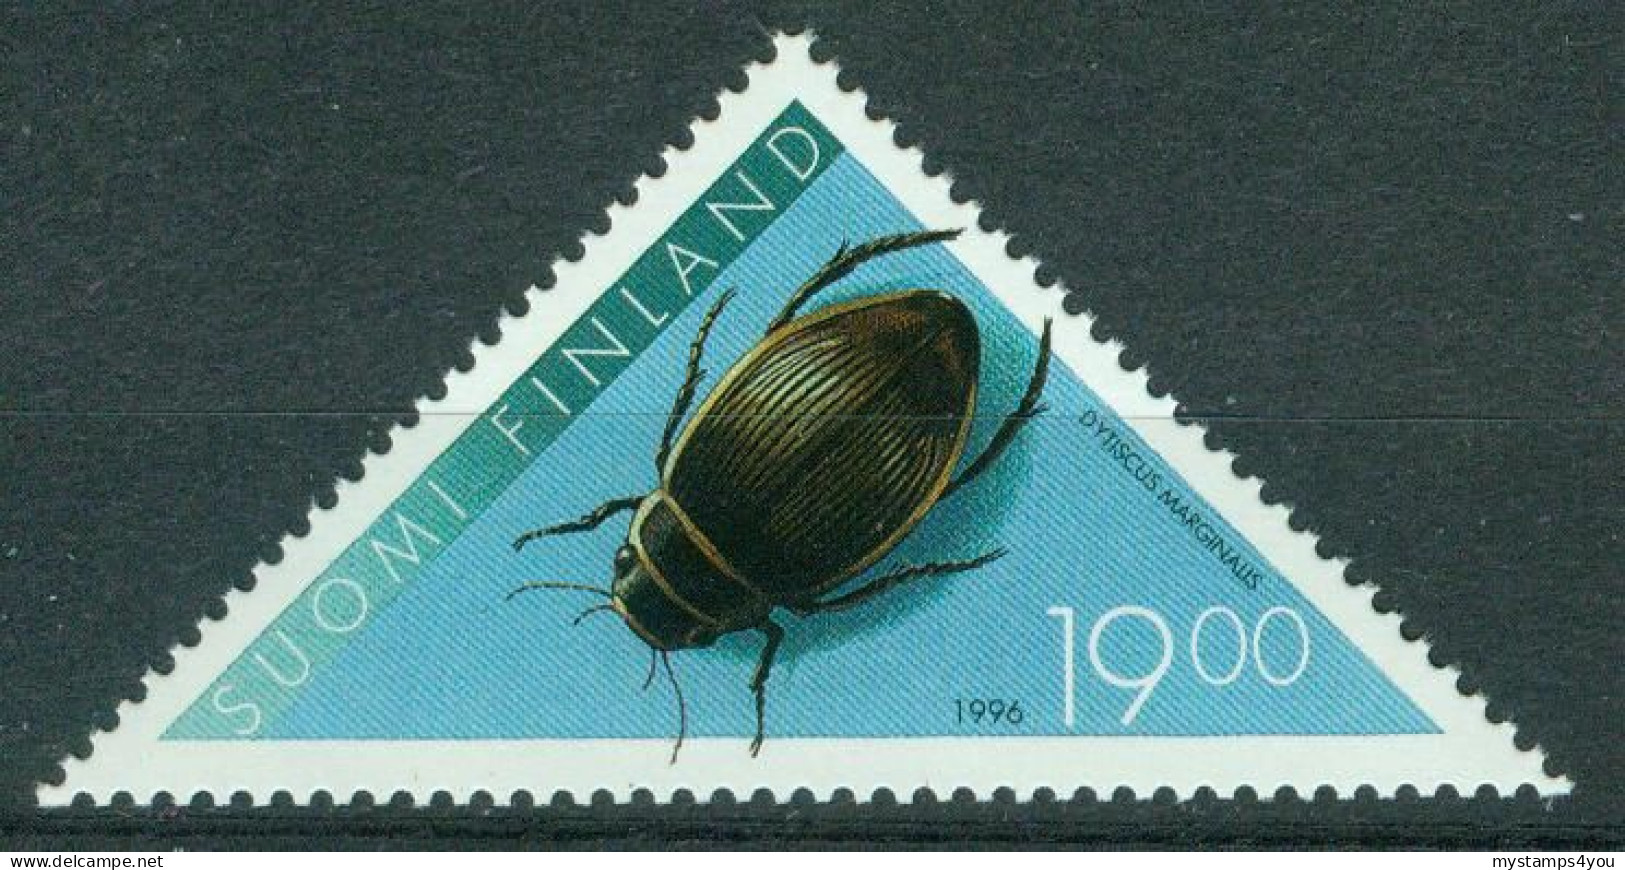 Bm Finland 1996 MiNr 1351 MNH | Great Diving Beetle #5-0216 - Unused Stamps